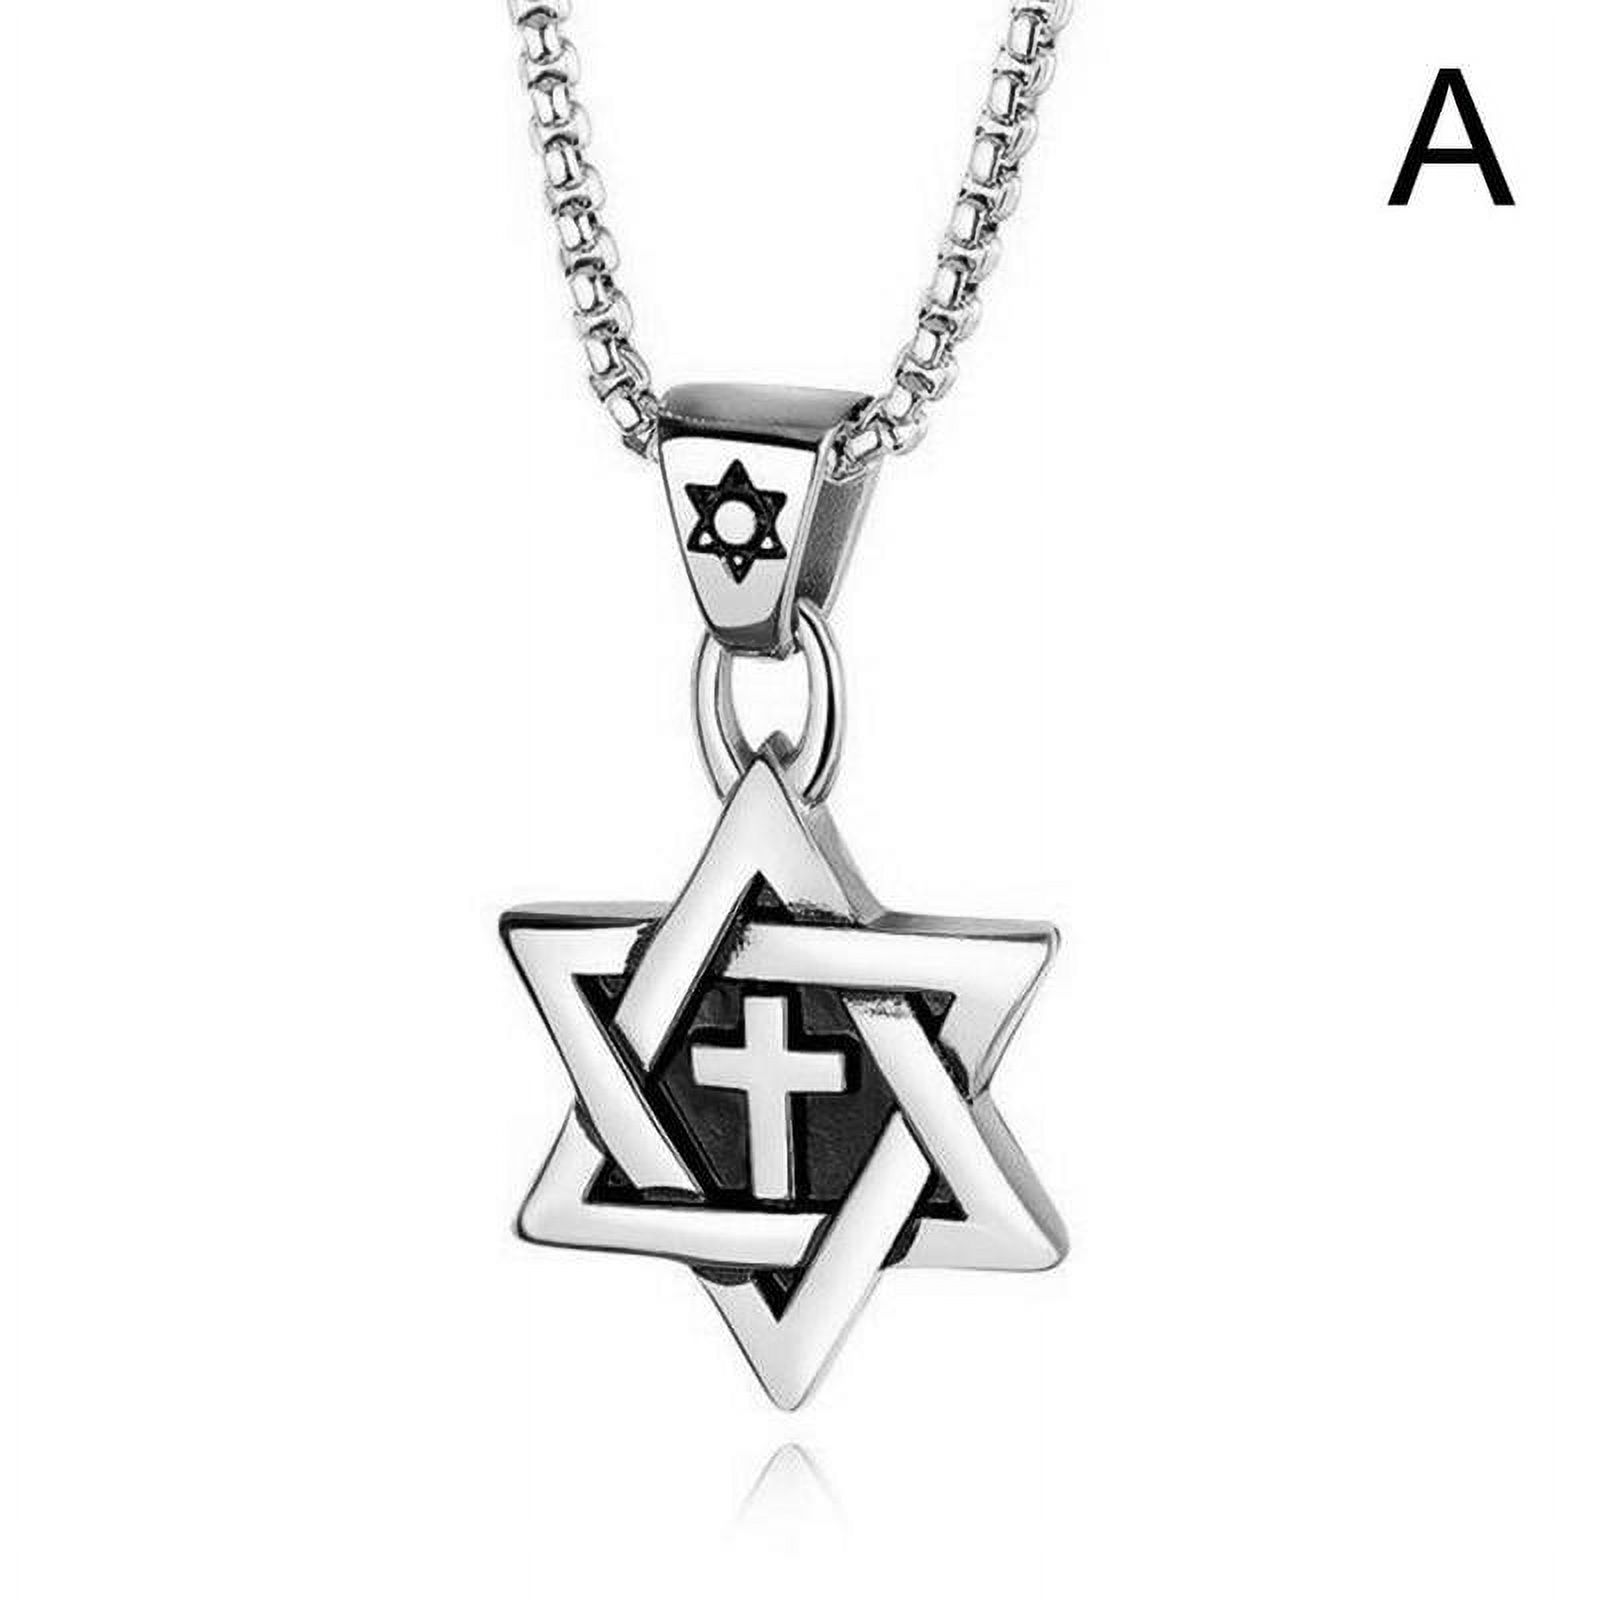 Stainless Steel Star Cross Pendant & Necklace Gold Color Women/Men Chain Israel Jewish Jewelry For Men - image 1 of 7